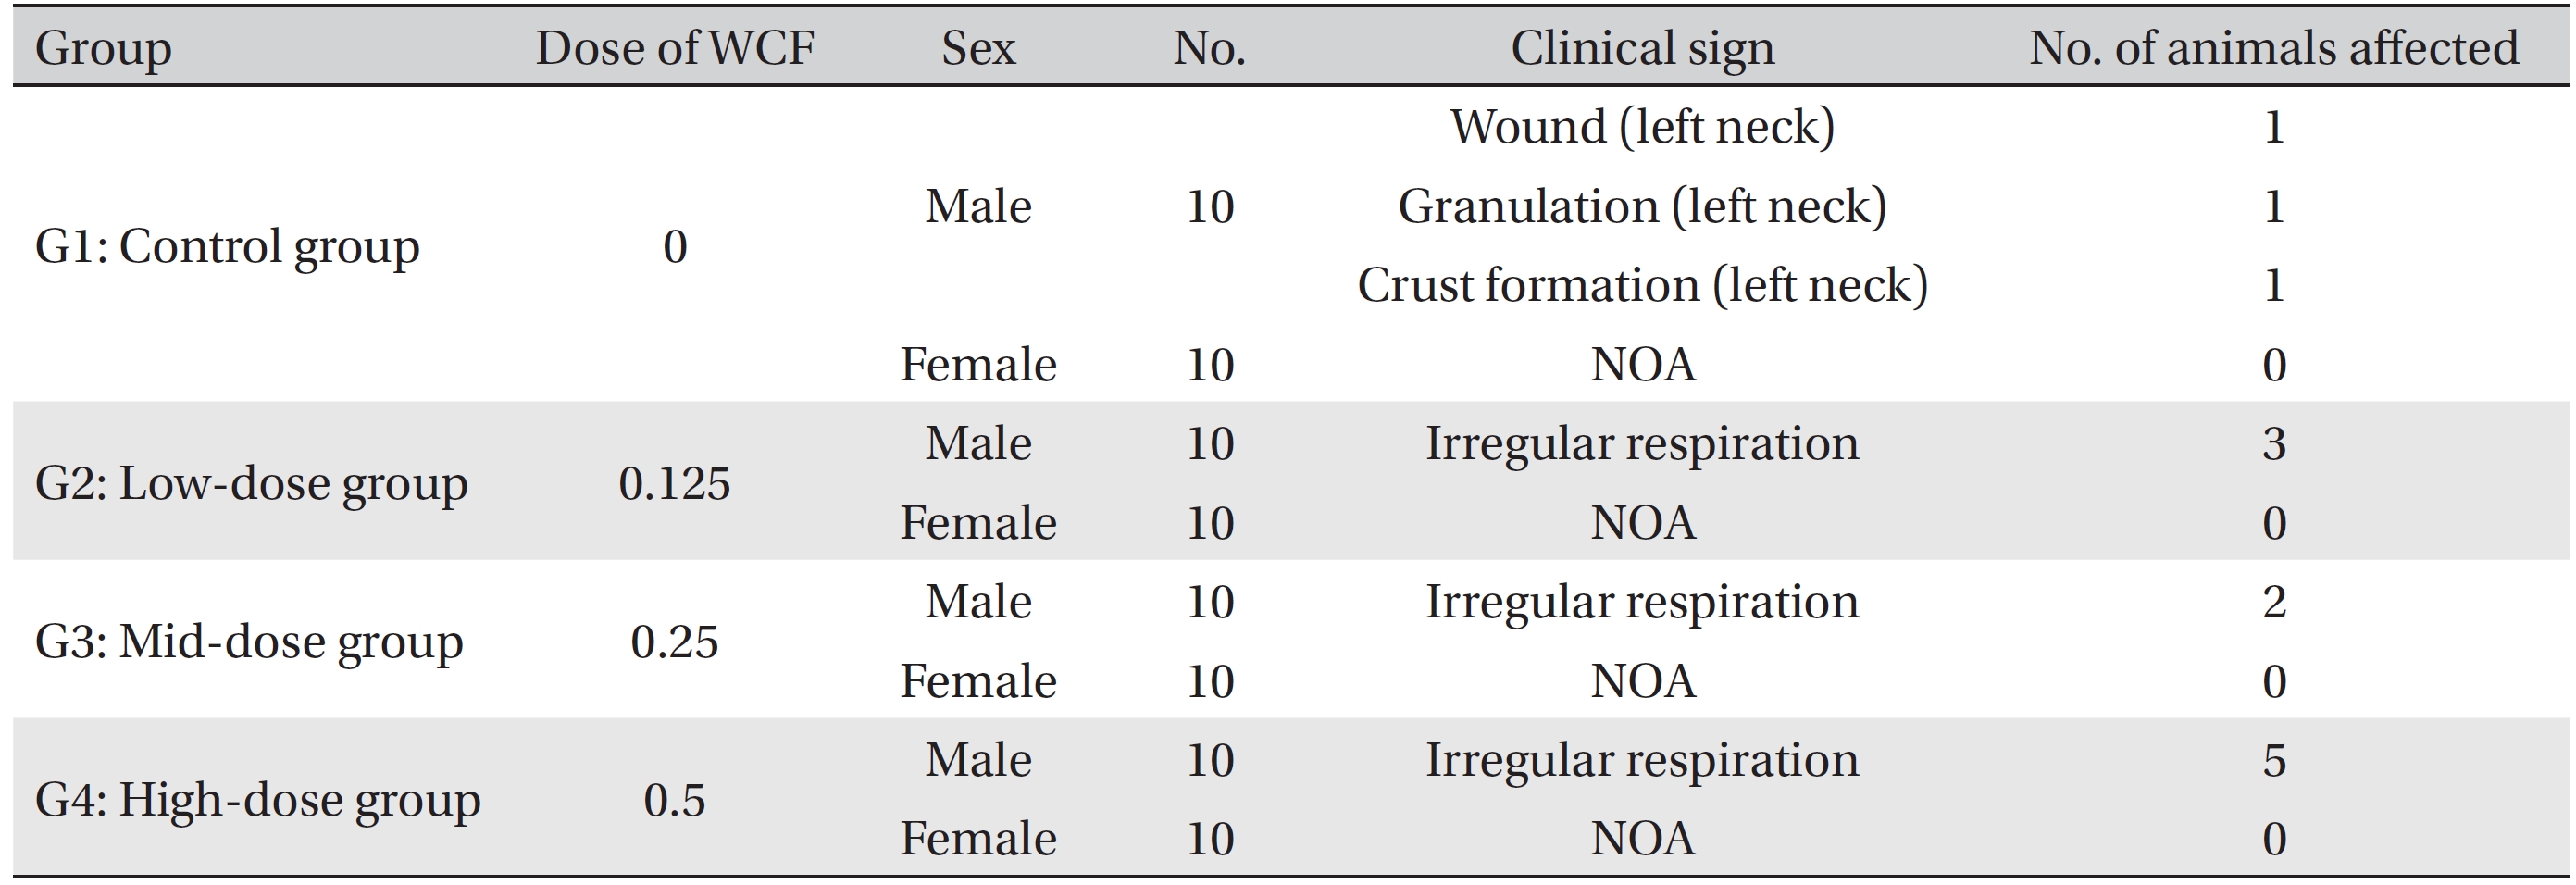 Summary of clinical signs